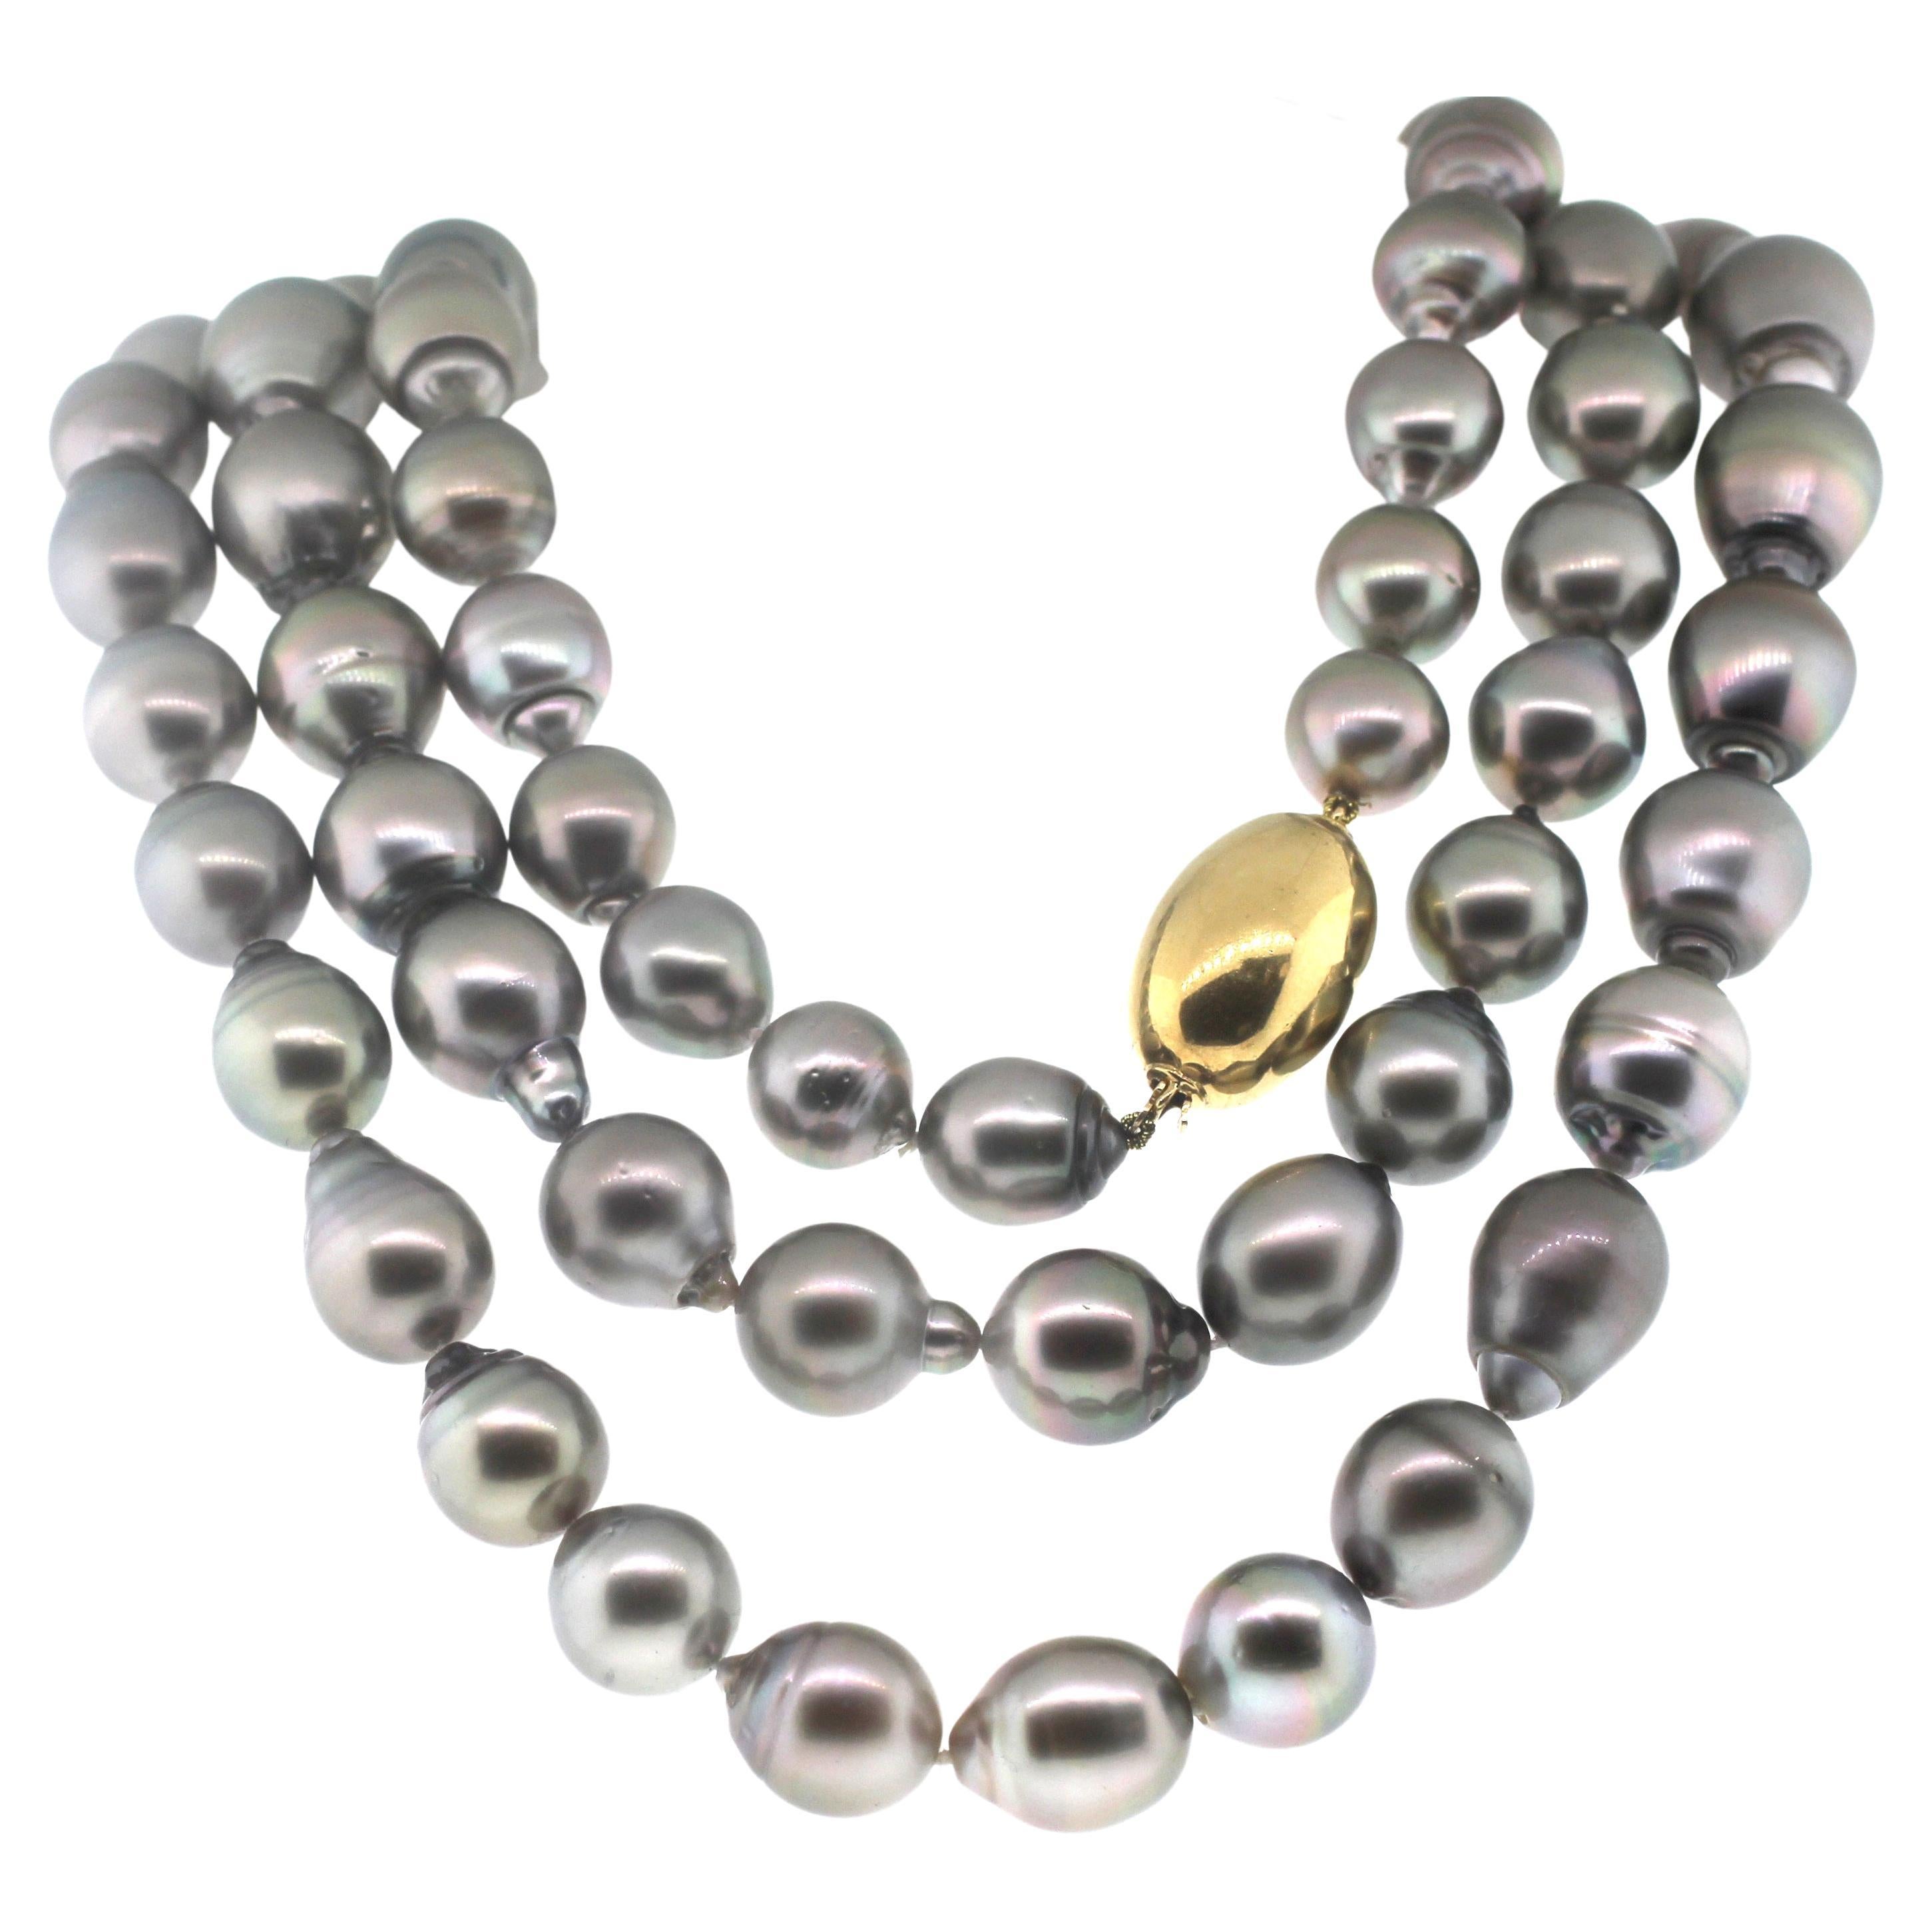 Hakimoto By Jewel Of Ocean 18K Tahitian South Sea Strand Necklace
18K Yellow Gold  
Weight (g): 266
69 Cultured South Sea Tahitian Pearl 
Pearl Size: 12X15mm 
Pearl Shape: Baroque 
Body color: Silver 
Orient: Very Good
Luster: Very Good 
Surface: 